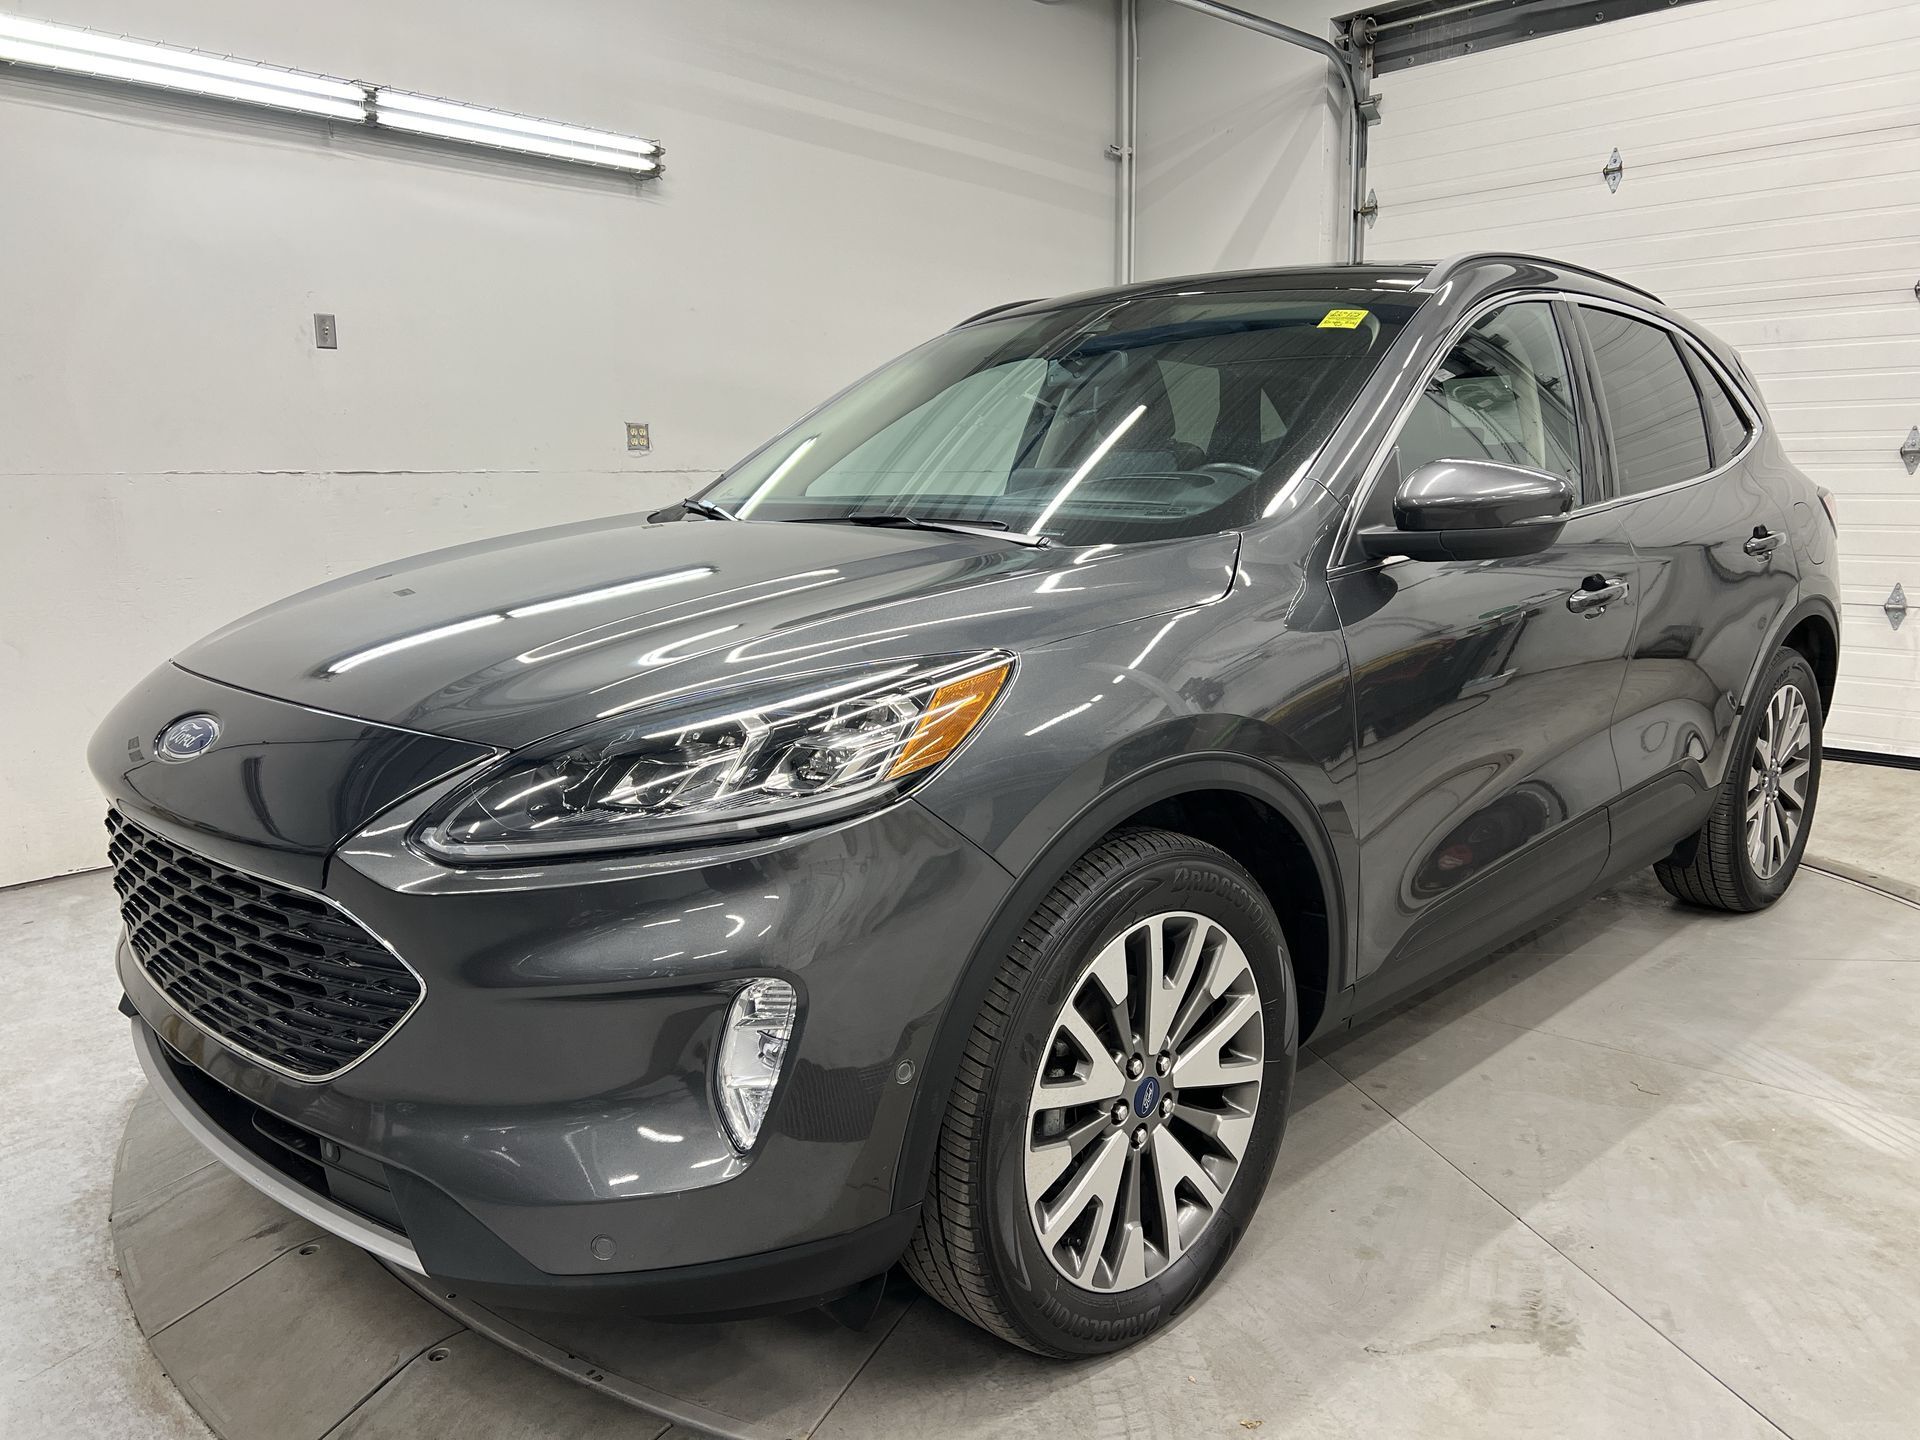 2020 Ford Escape HYBRID TITANIUM AWD| PANO ROOF | HTD LEATHER | HUD